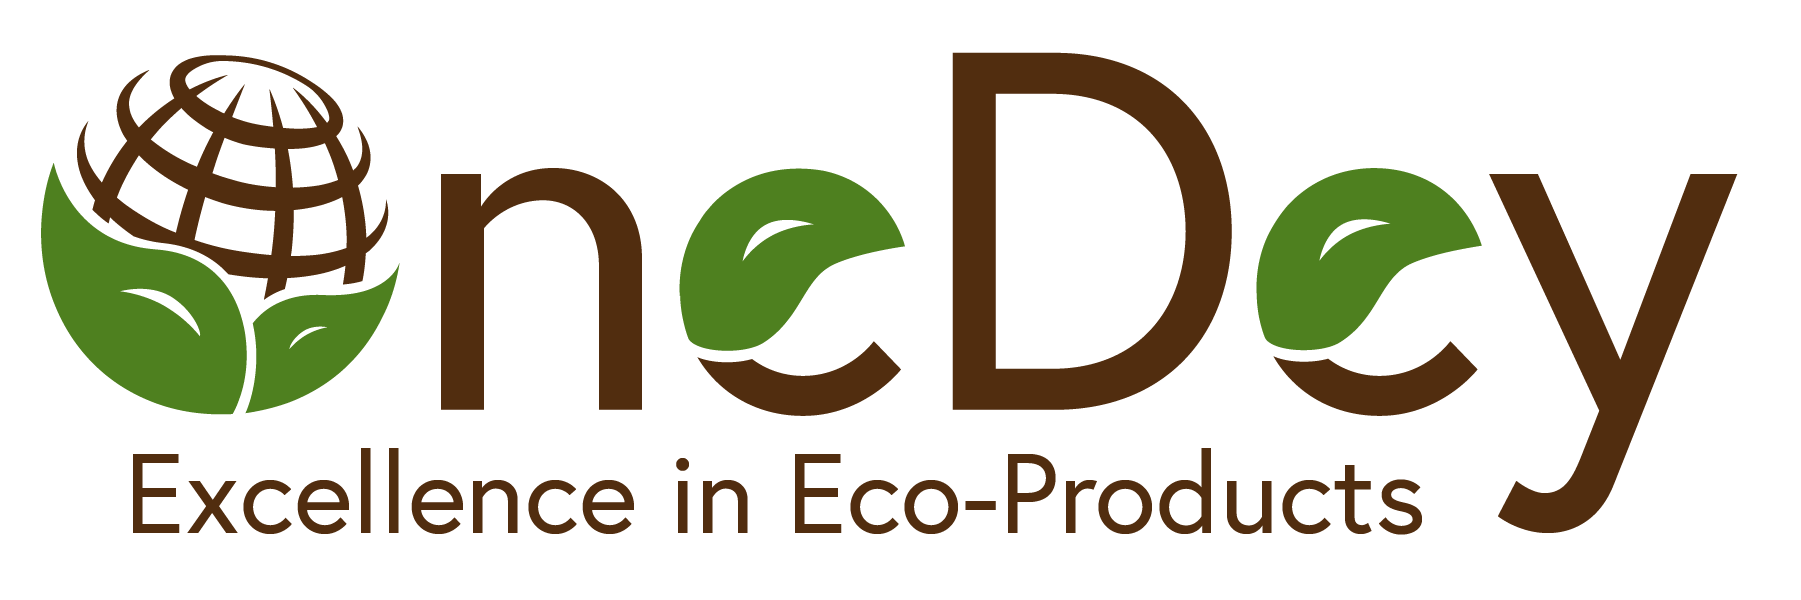 OneDey: Eco Friendly Products